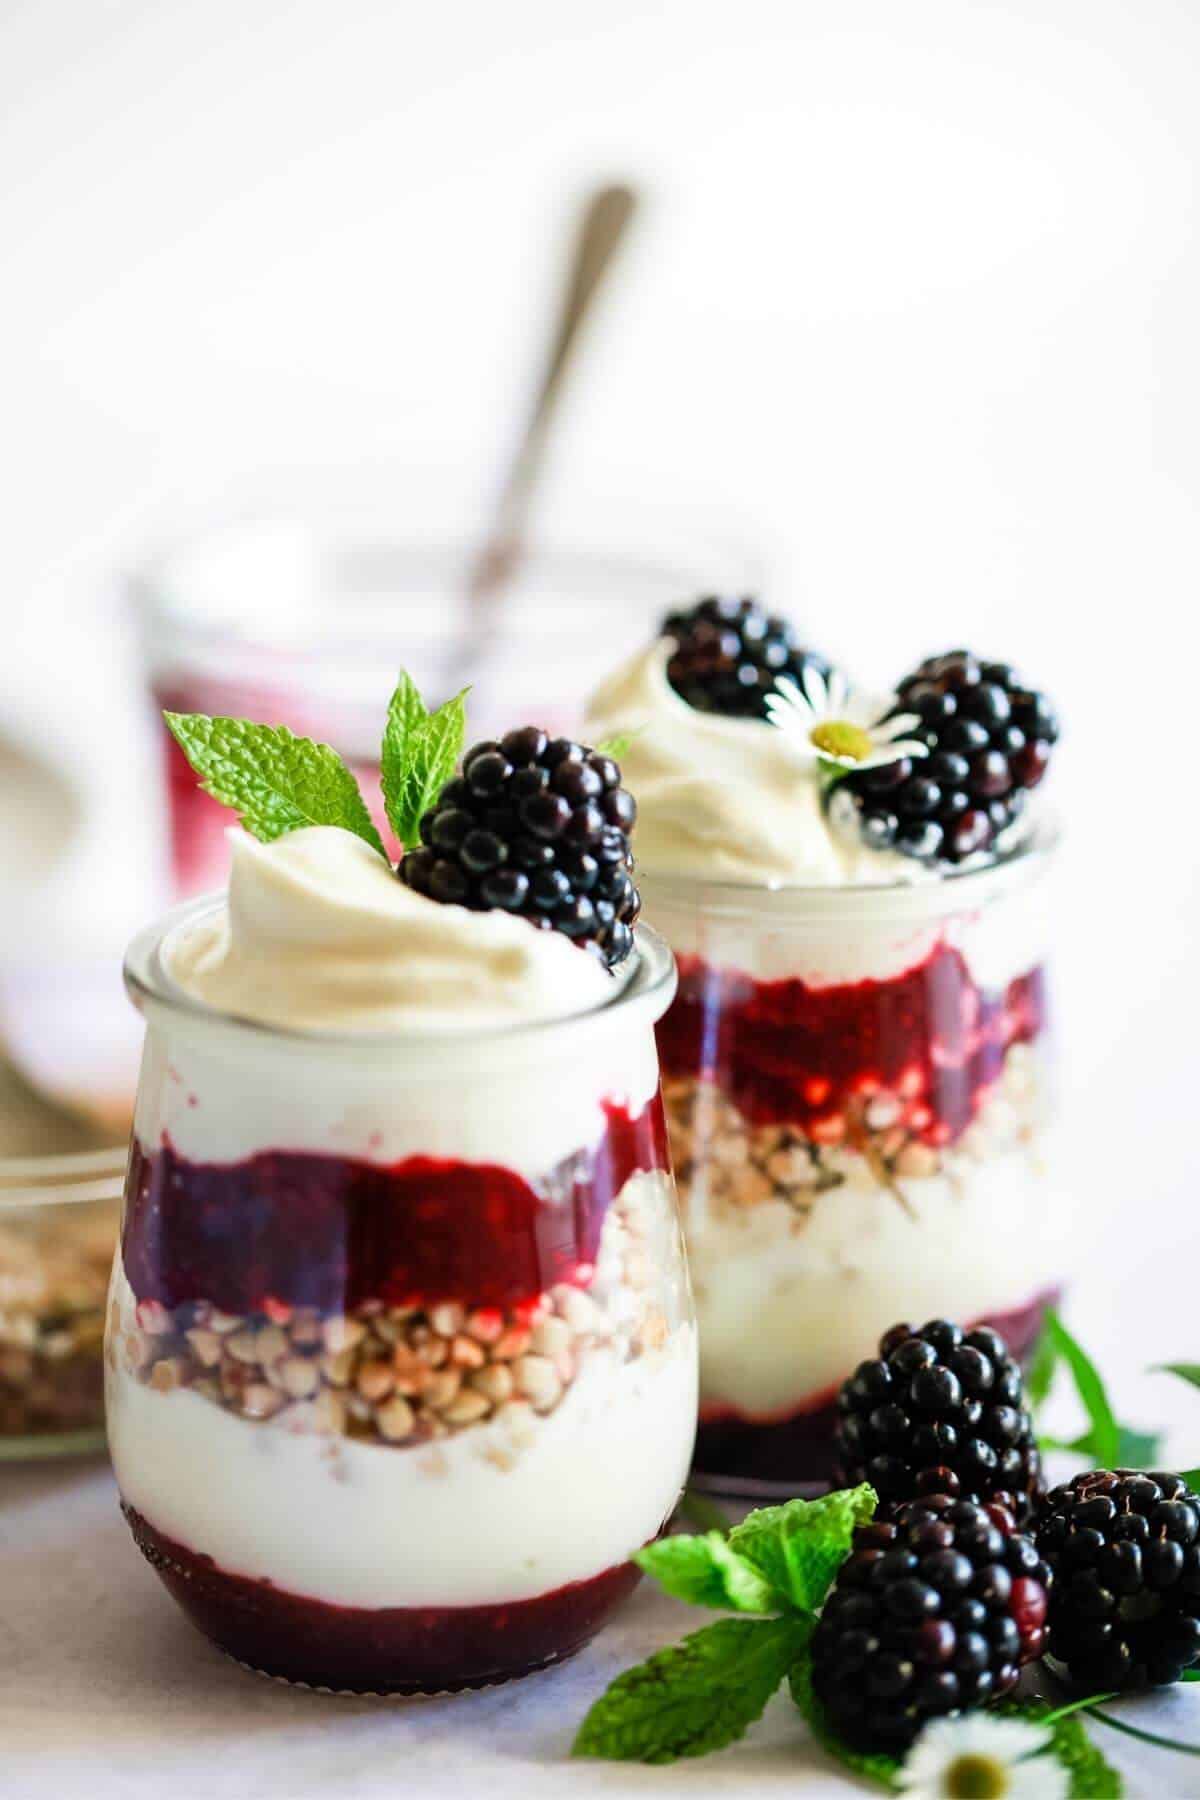 Two blackberry yogurt parfaits garnished with mint and daisies.